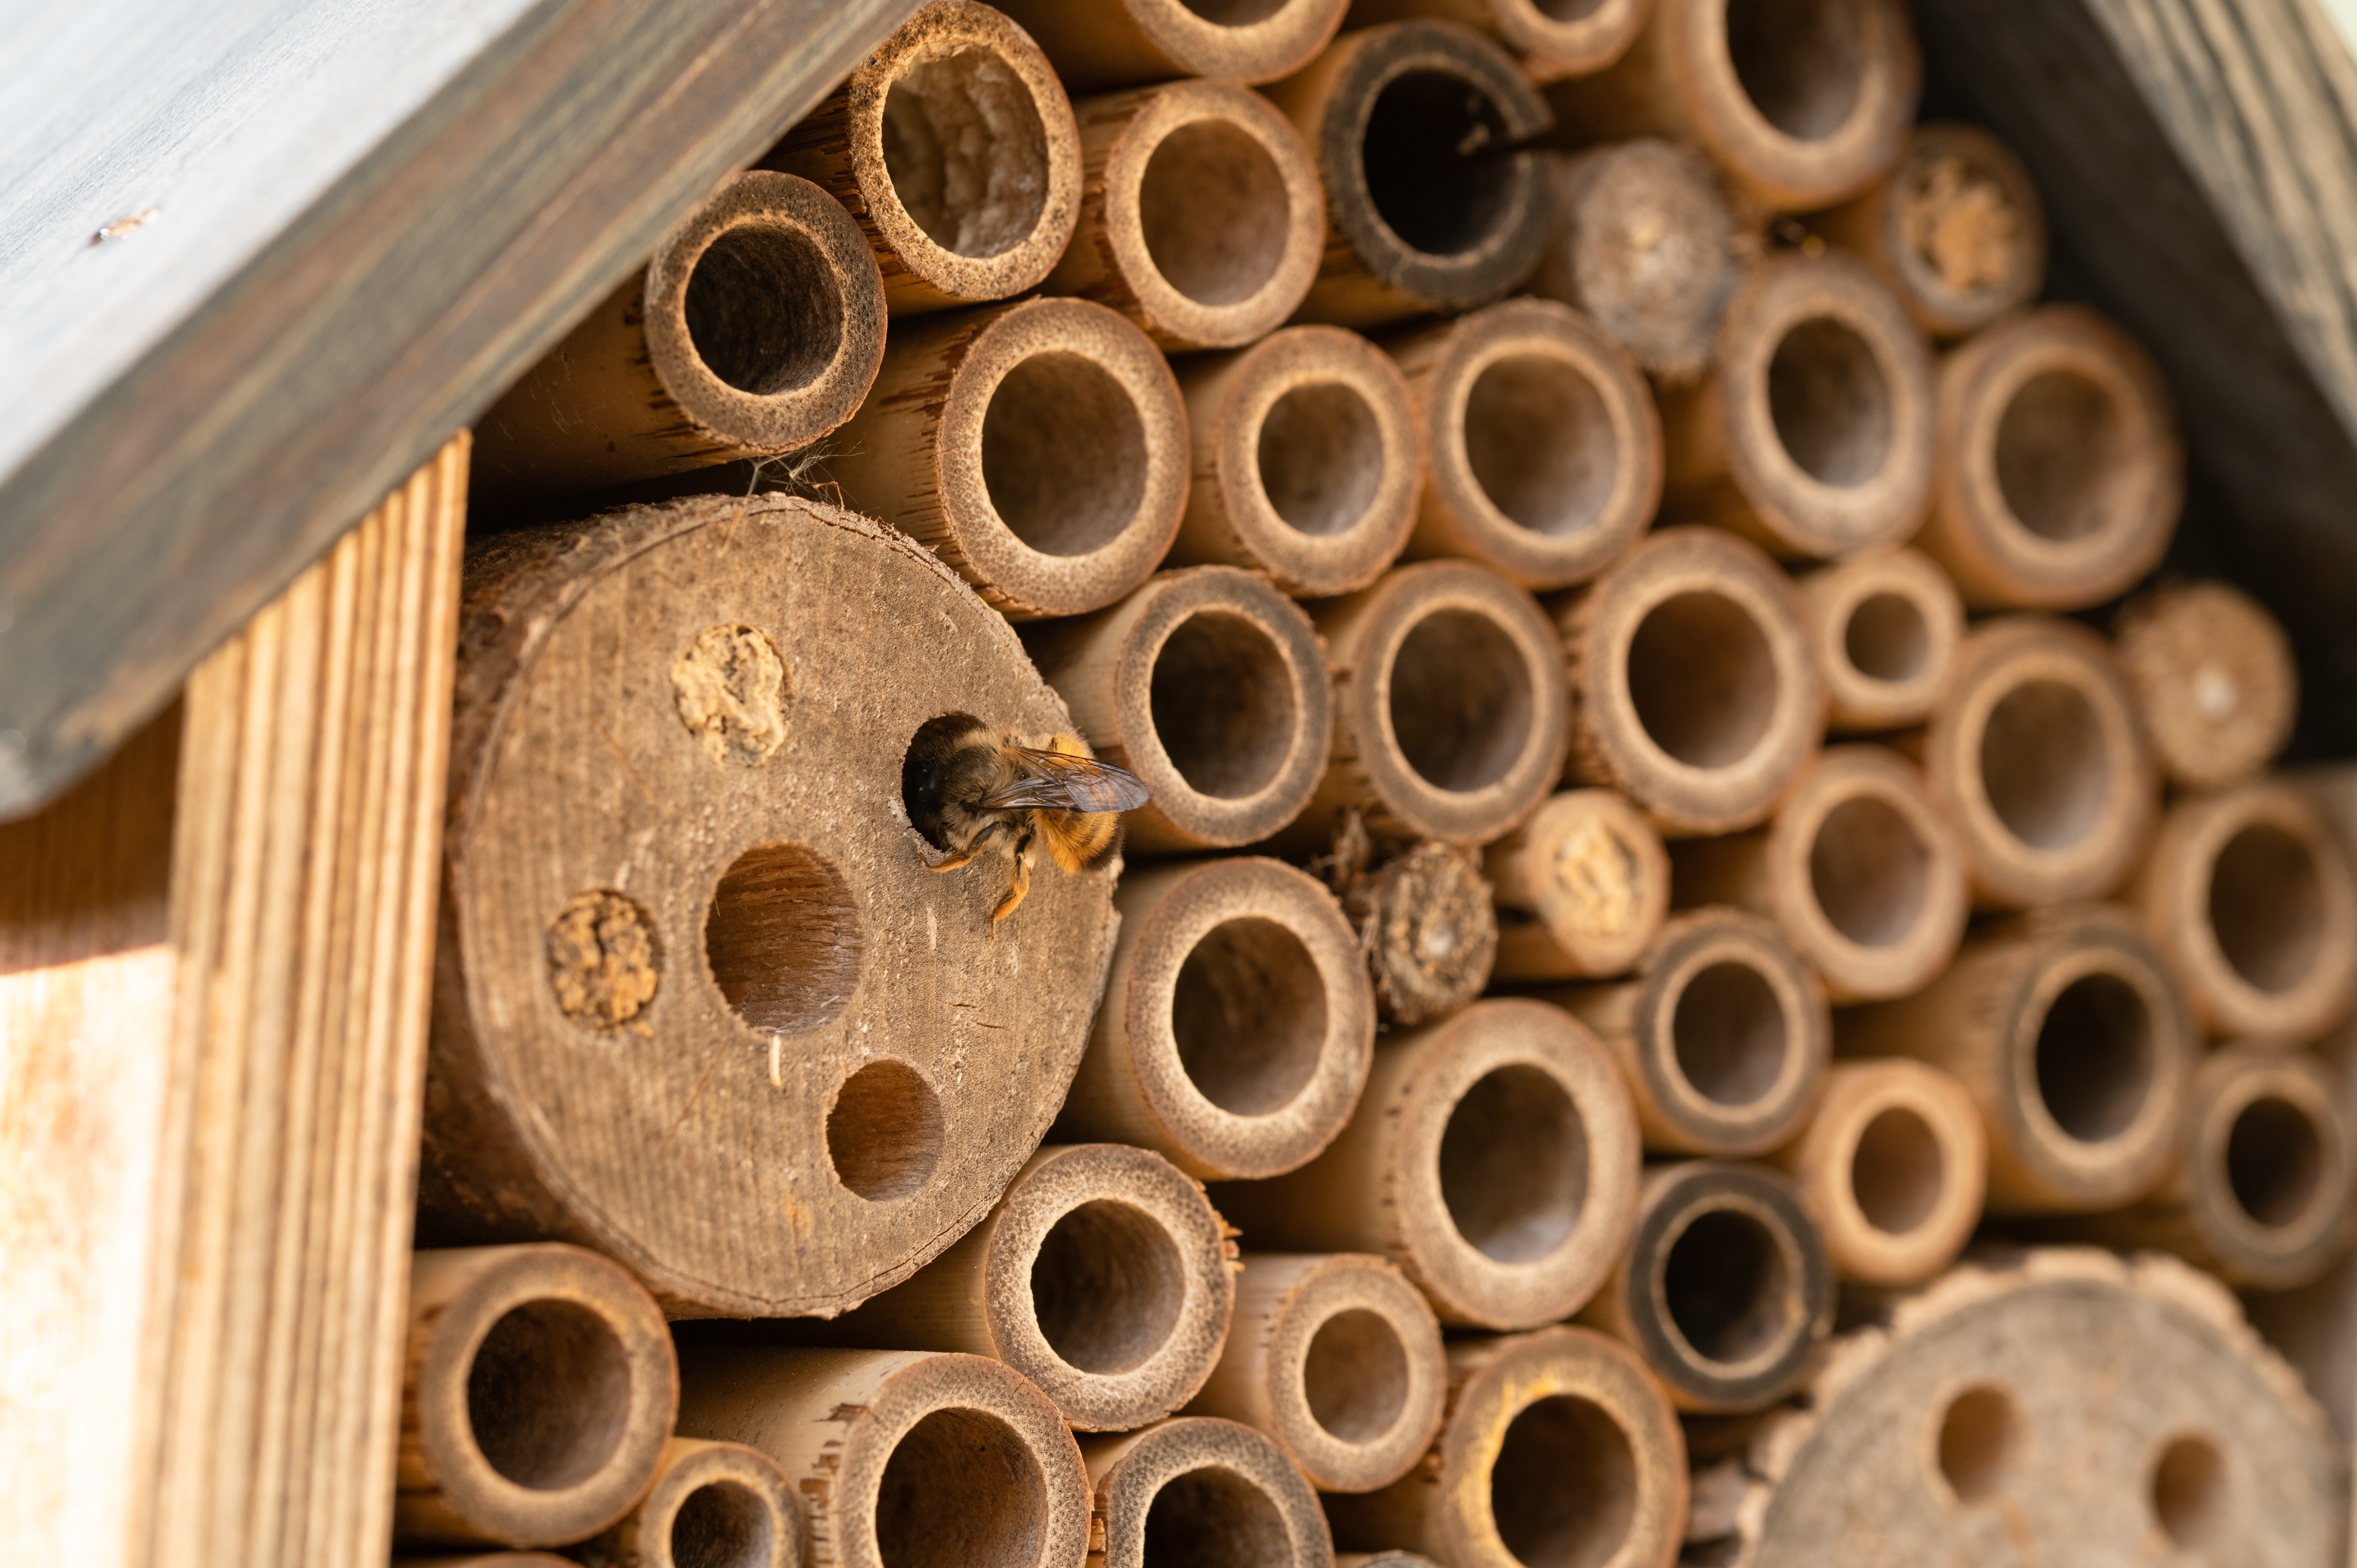 How we can help solitary bees - Forestry and Land Scotland